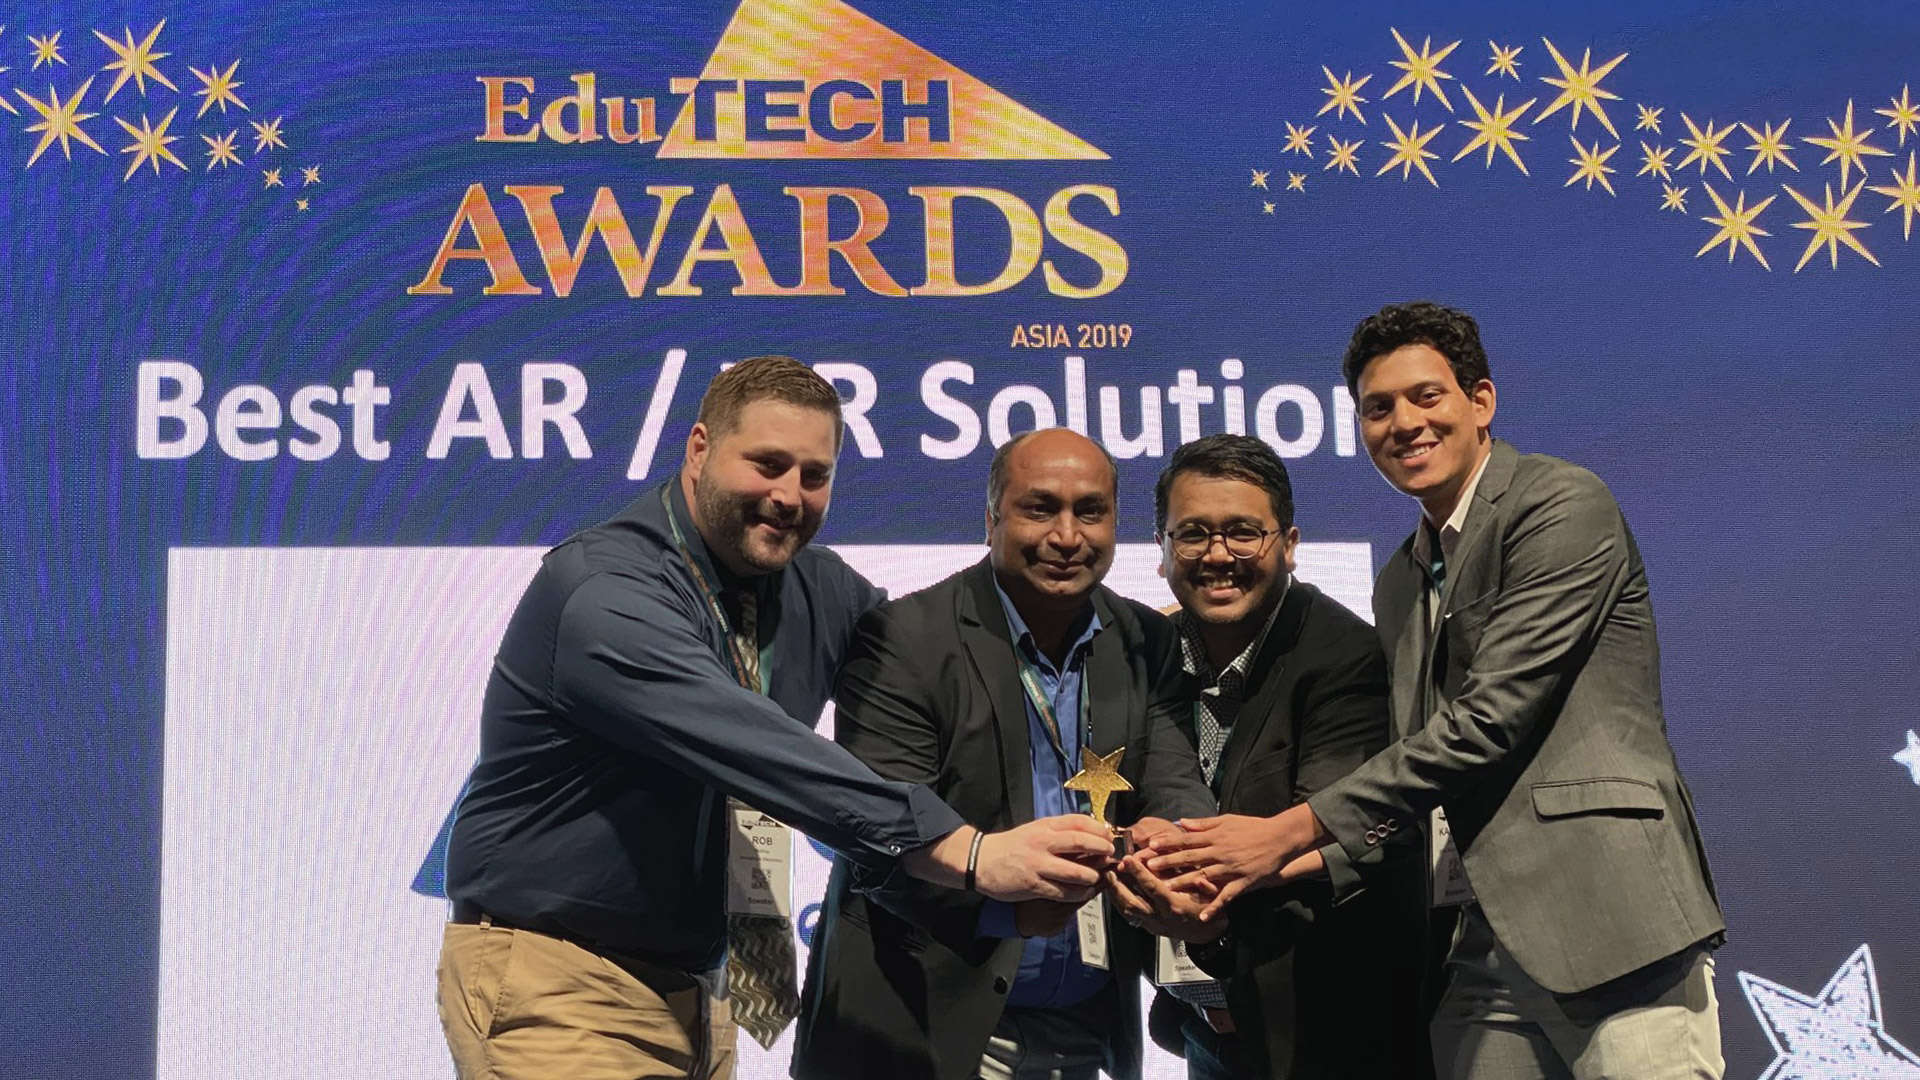 EON Reality Wins Best AR/VR Education Solution at EduTECH Asia 2019